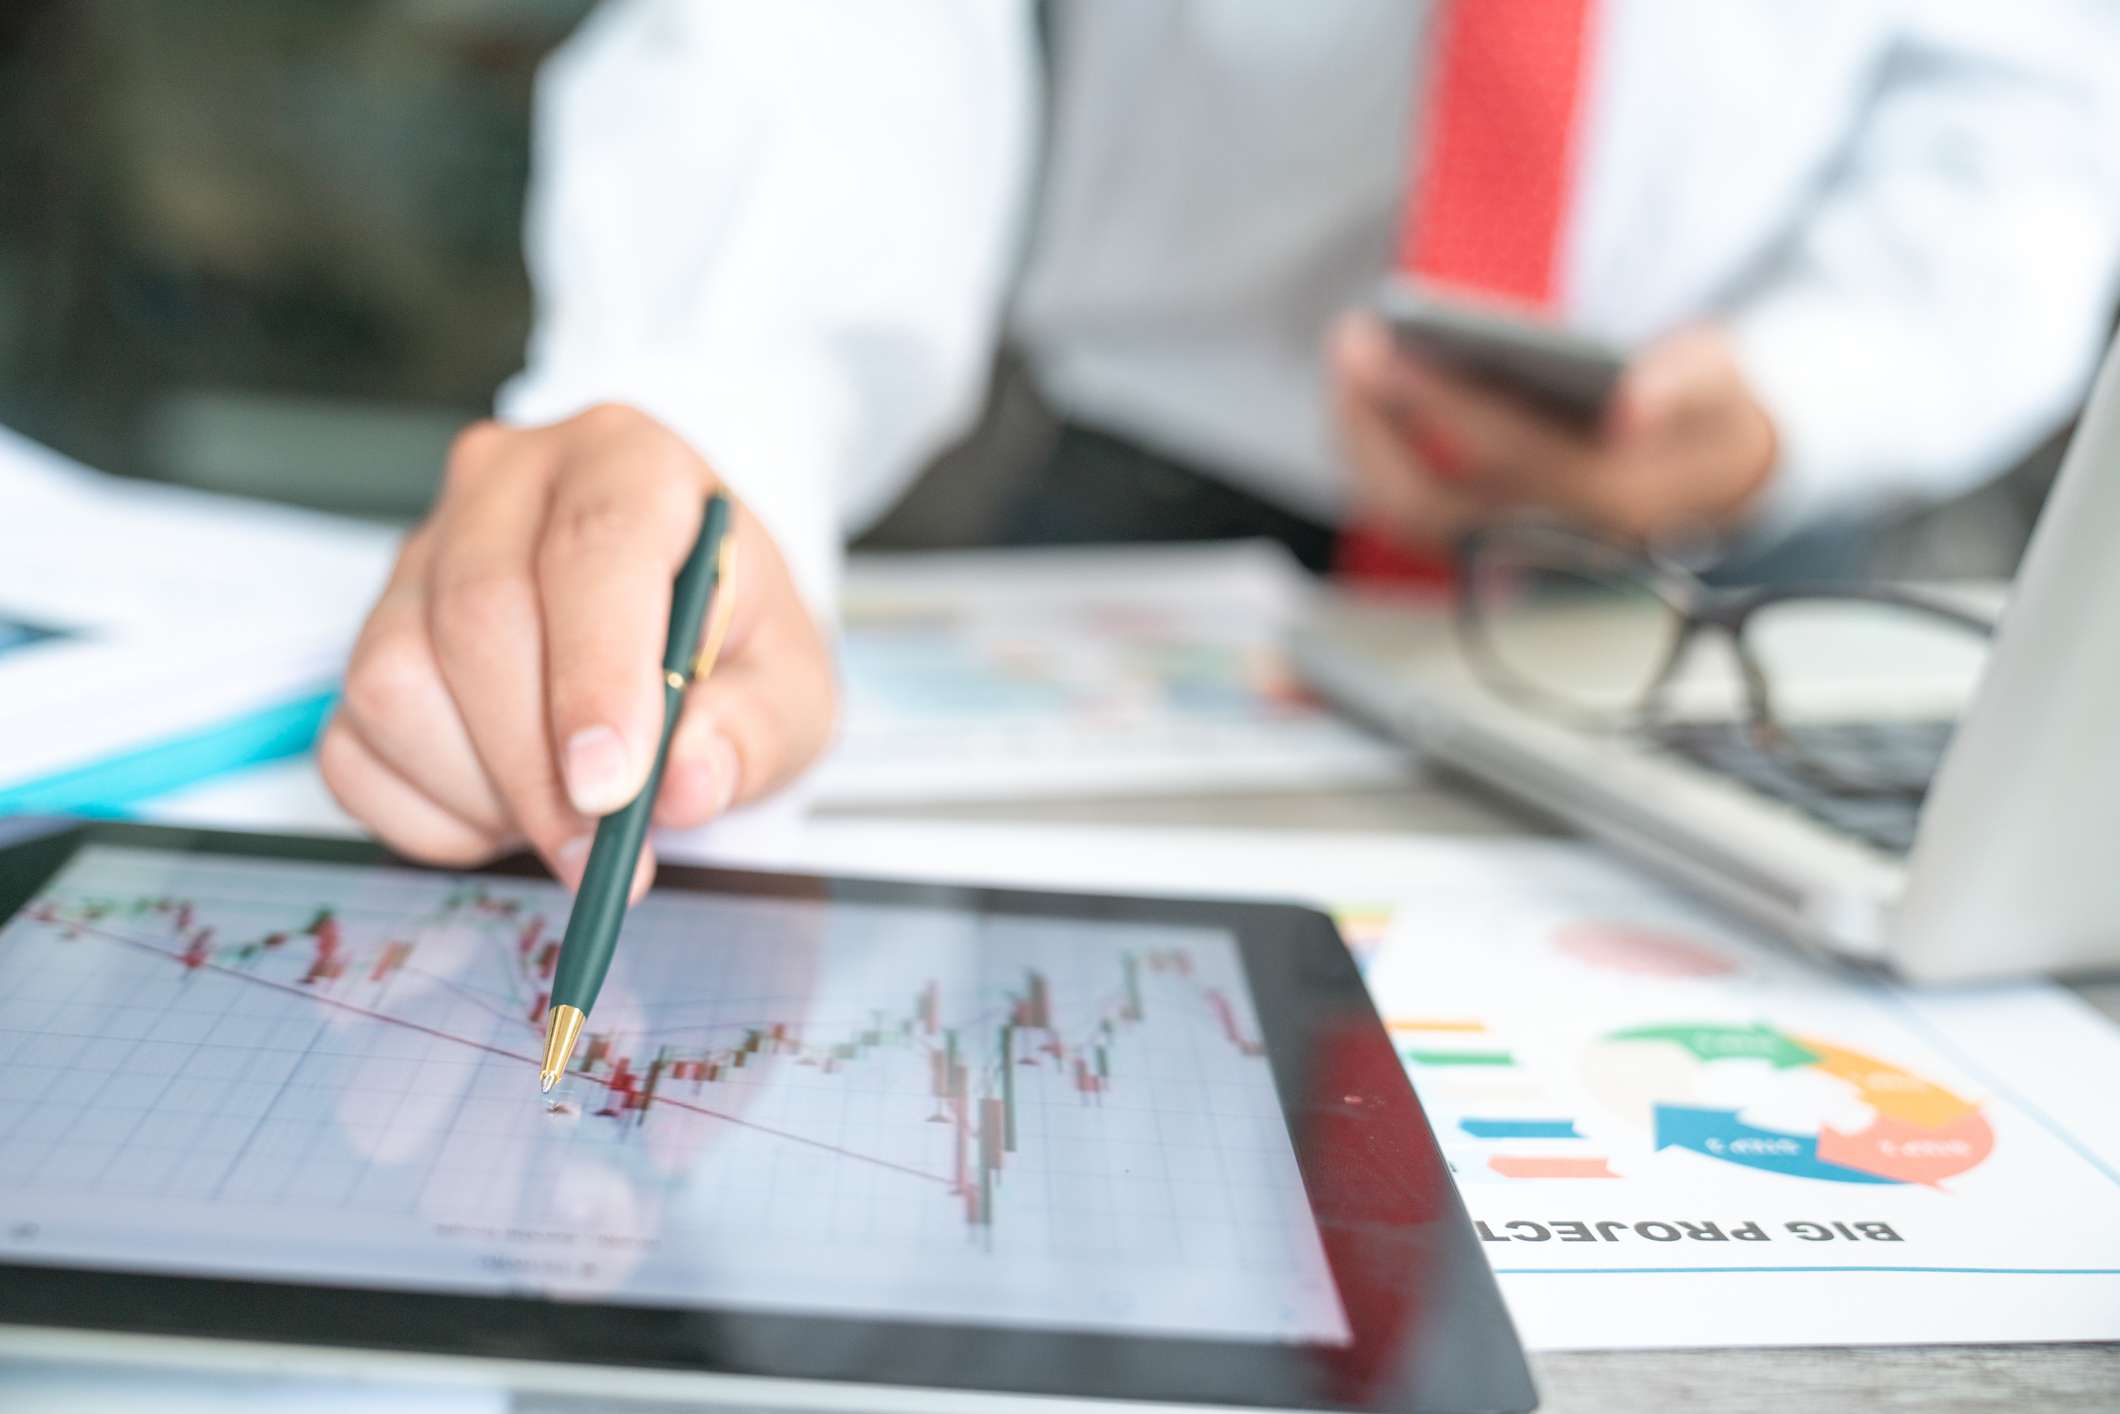 A man holding a pen pointing to a stock market chart on a tablet.